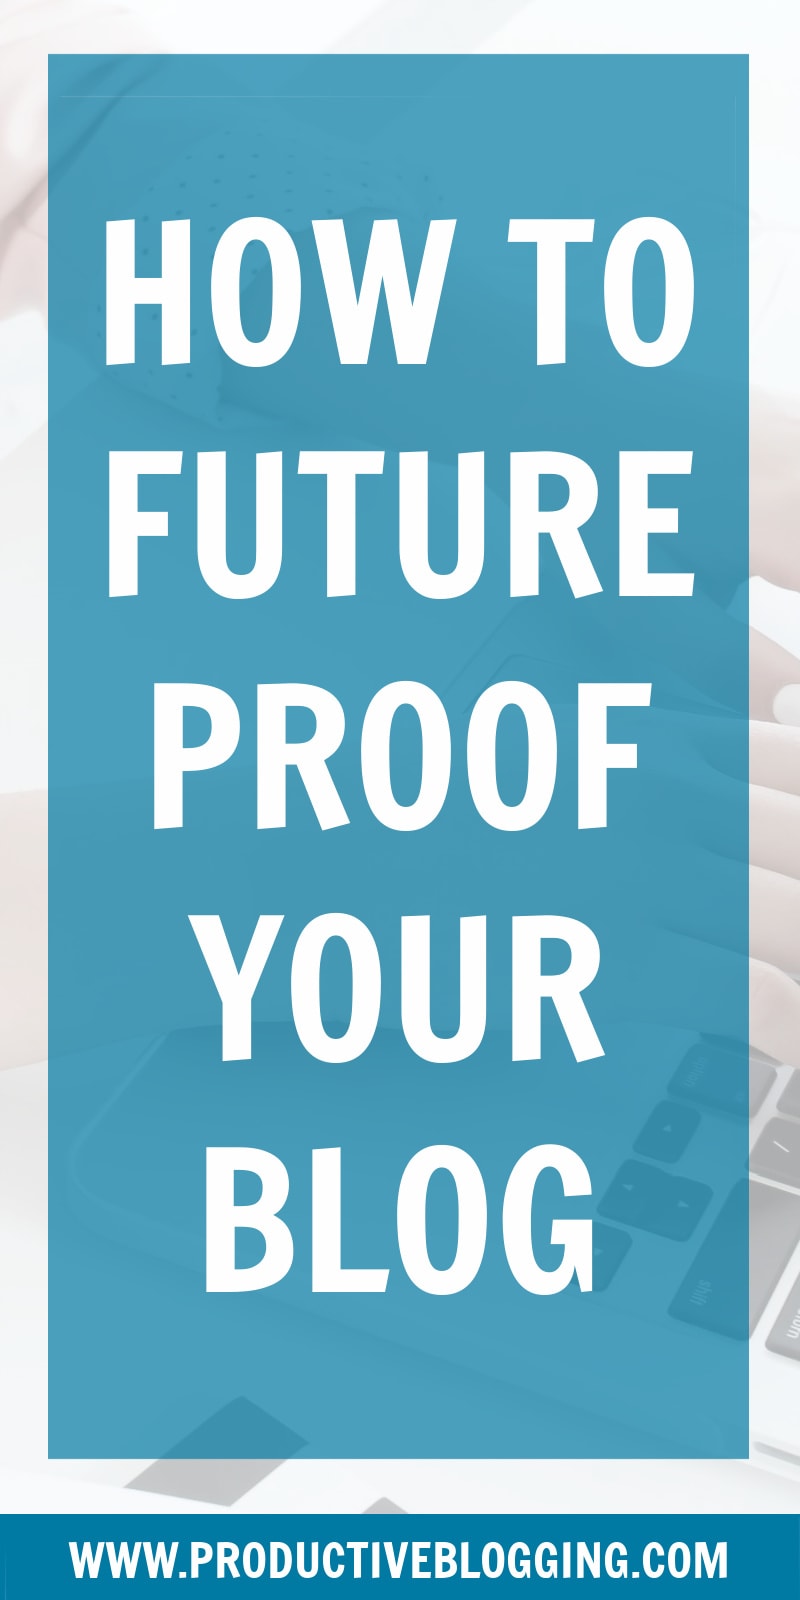 How secure is your blogging income right now? Many bloggers are in quite a precarious position… just one small algorithm change away from radically slashed traffic and income. Here’s how to future-proof your blog. #makemoneyblogging #moneymakingblog #profitableblog #blogginglife #bloglife #blogging #bloggersofIG #professionalblogger #solopreneur #mompreneur #bloggingtips #productivitytips #productivity #productivebloggingcommunity #productiveblogging #blogsmarternotharder #productiveblogging